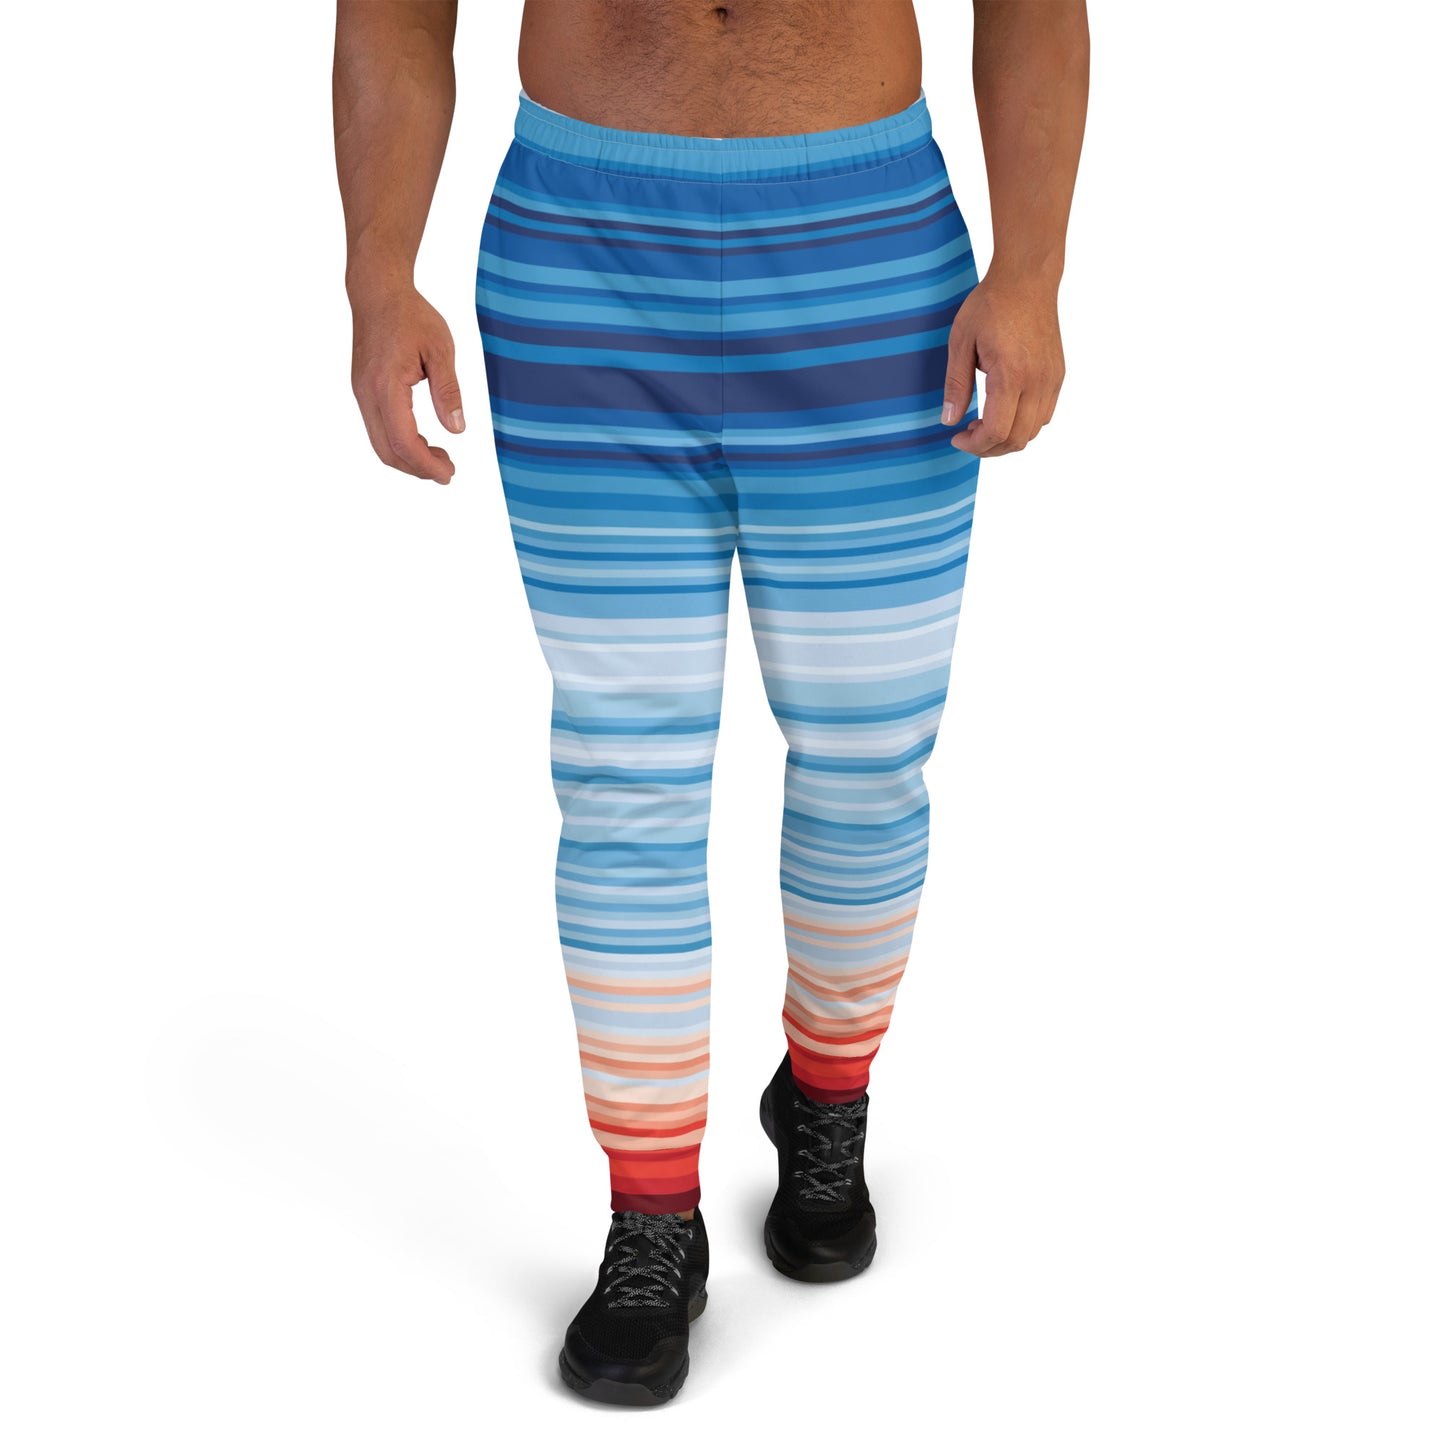 Climate Change Global Warming Stripes - Sustainably Made Men's Jogger